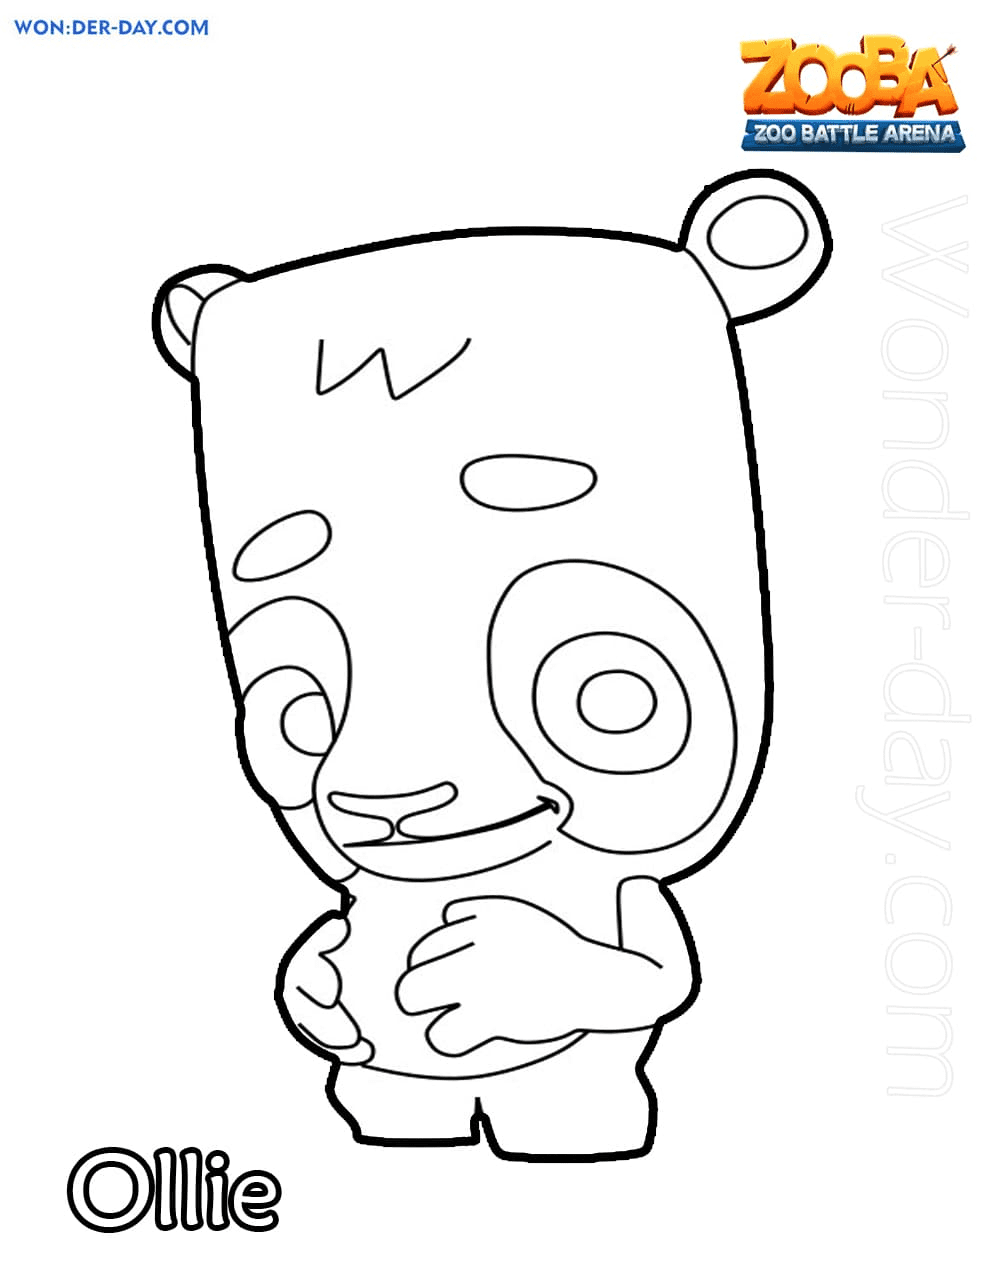 Ollie Zooba Coloring Pages